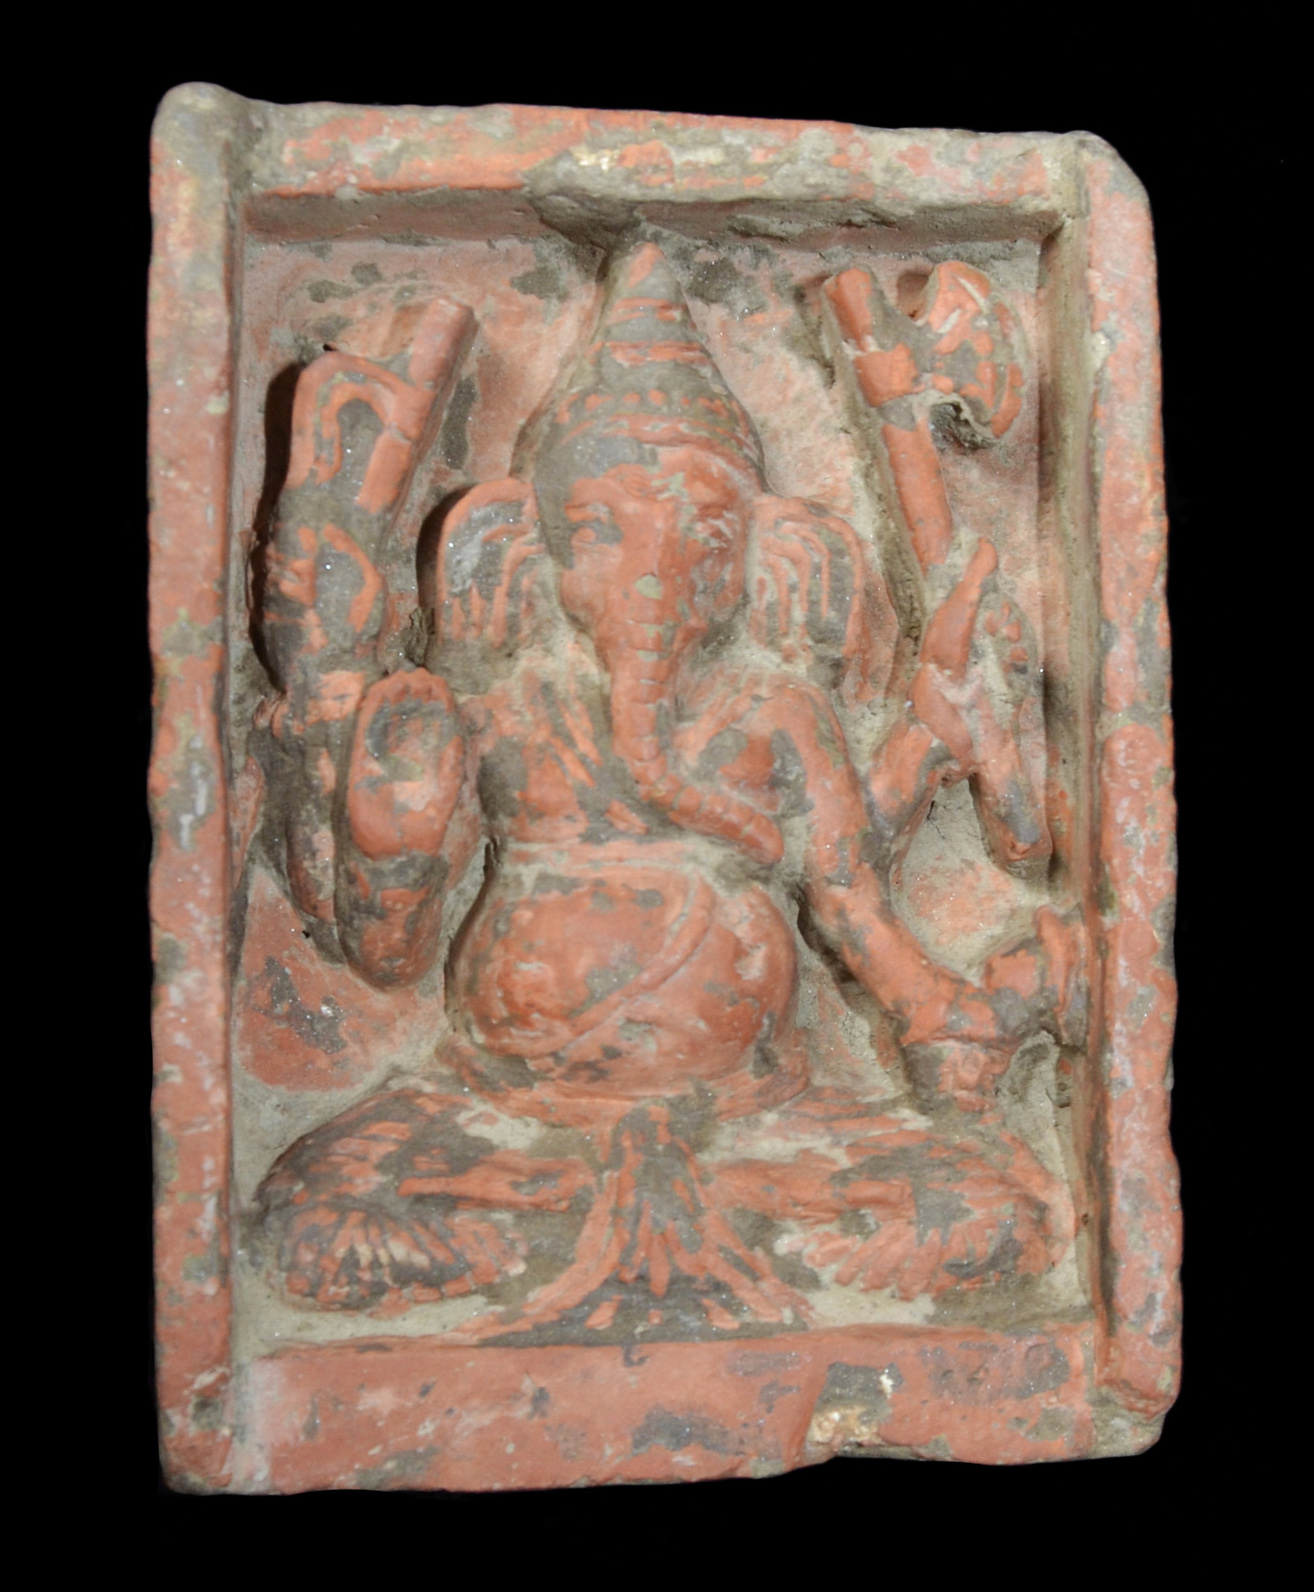 Fine Clay Votive Temple Tile depicting the Deity Ganesh West Bengal India 13th-16th Century